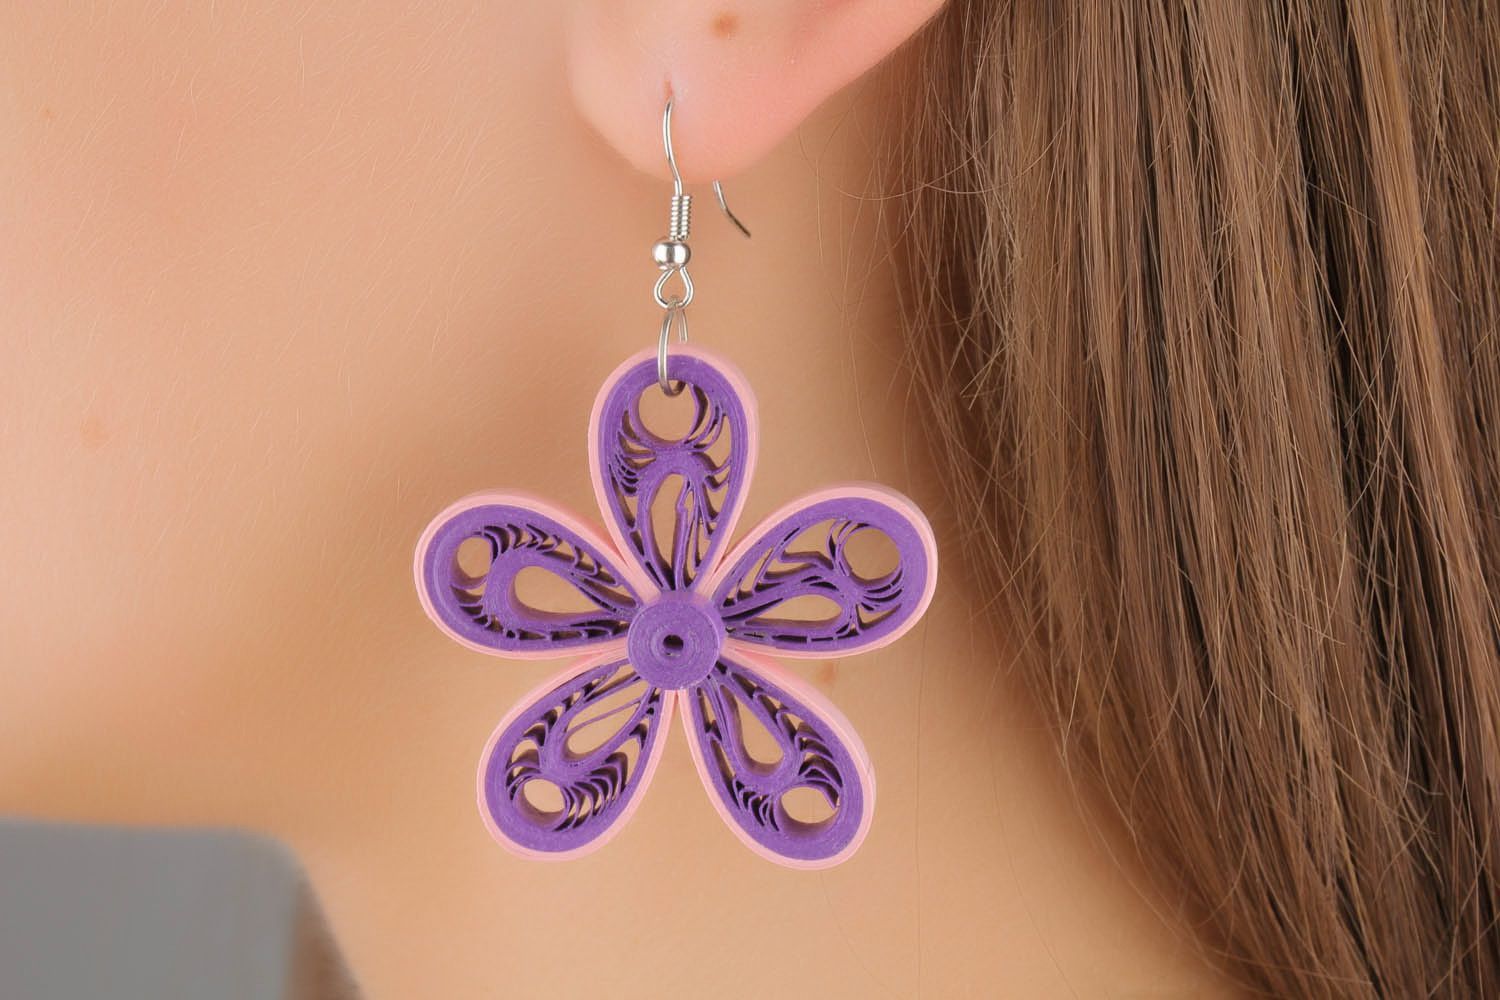 Design earrings made using quilling technique photo 1